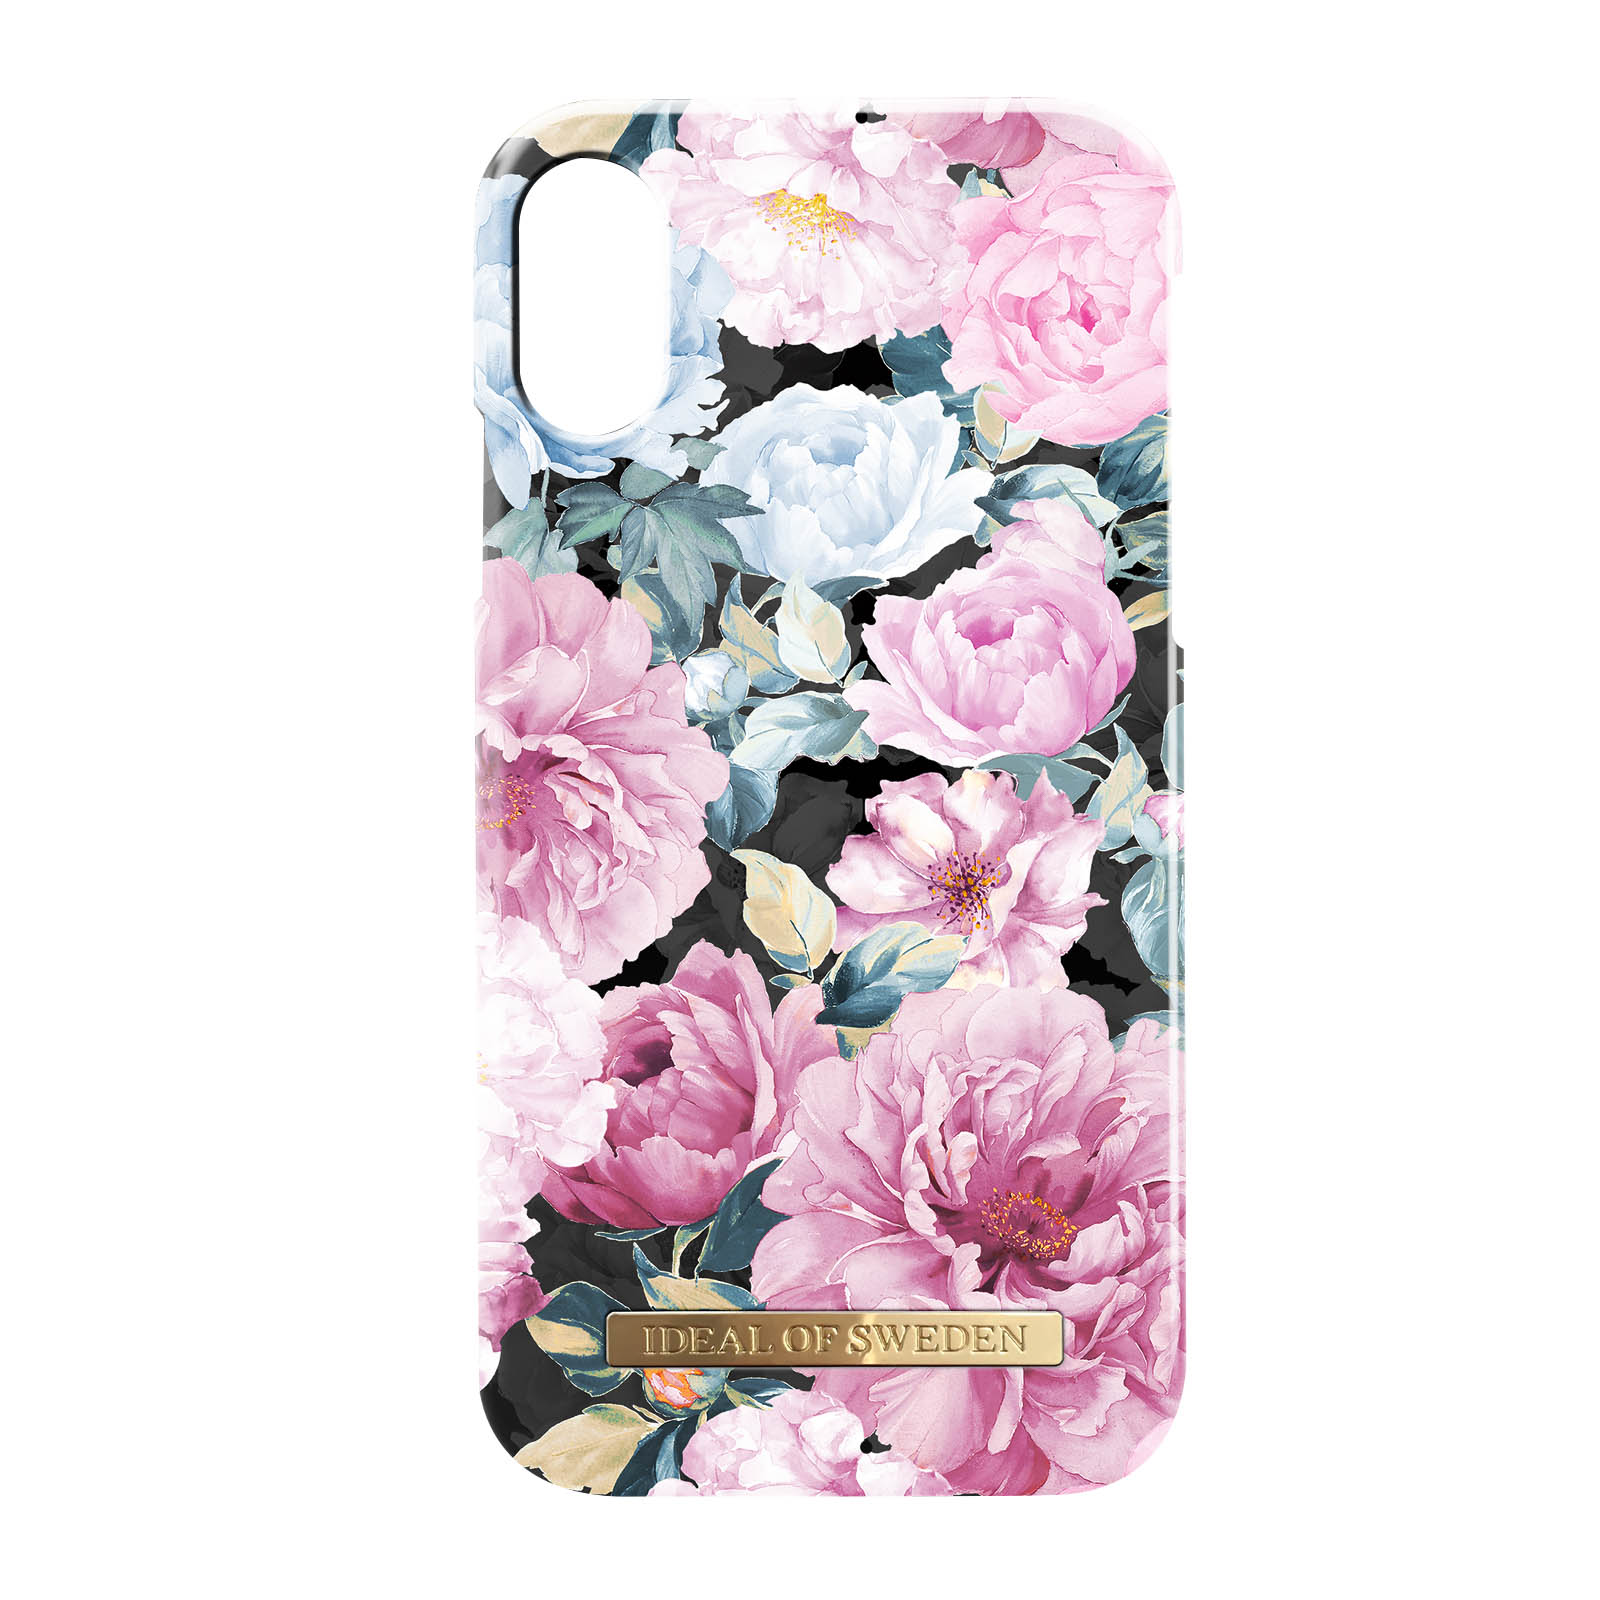 IDEAL OF SWEDEN Peony Series, XS, Rosa Backcover, Garden Apple, iPhone Hülle